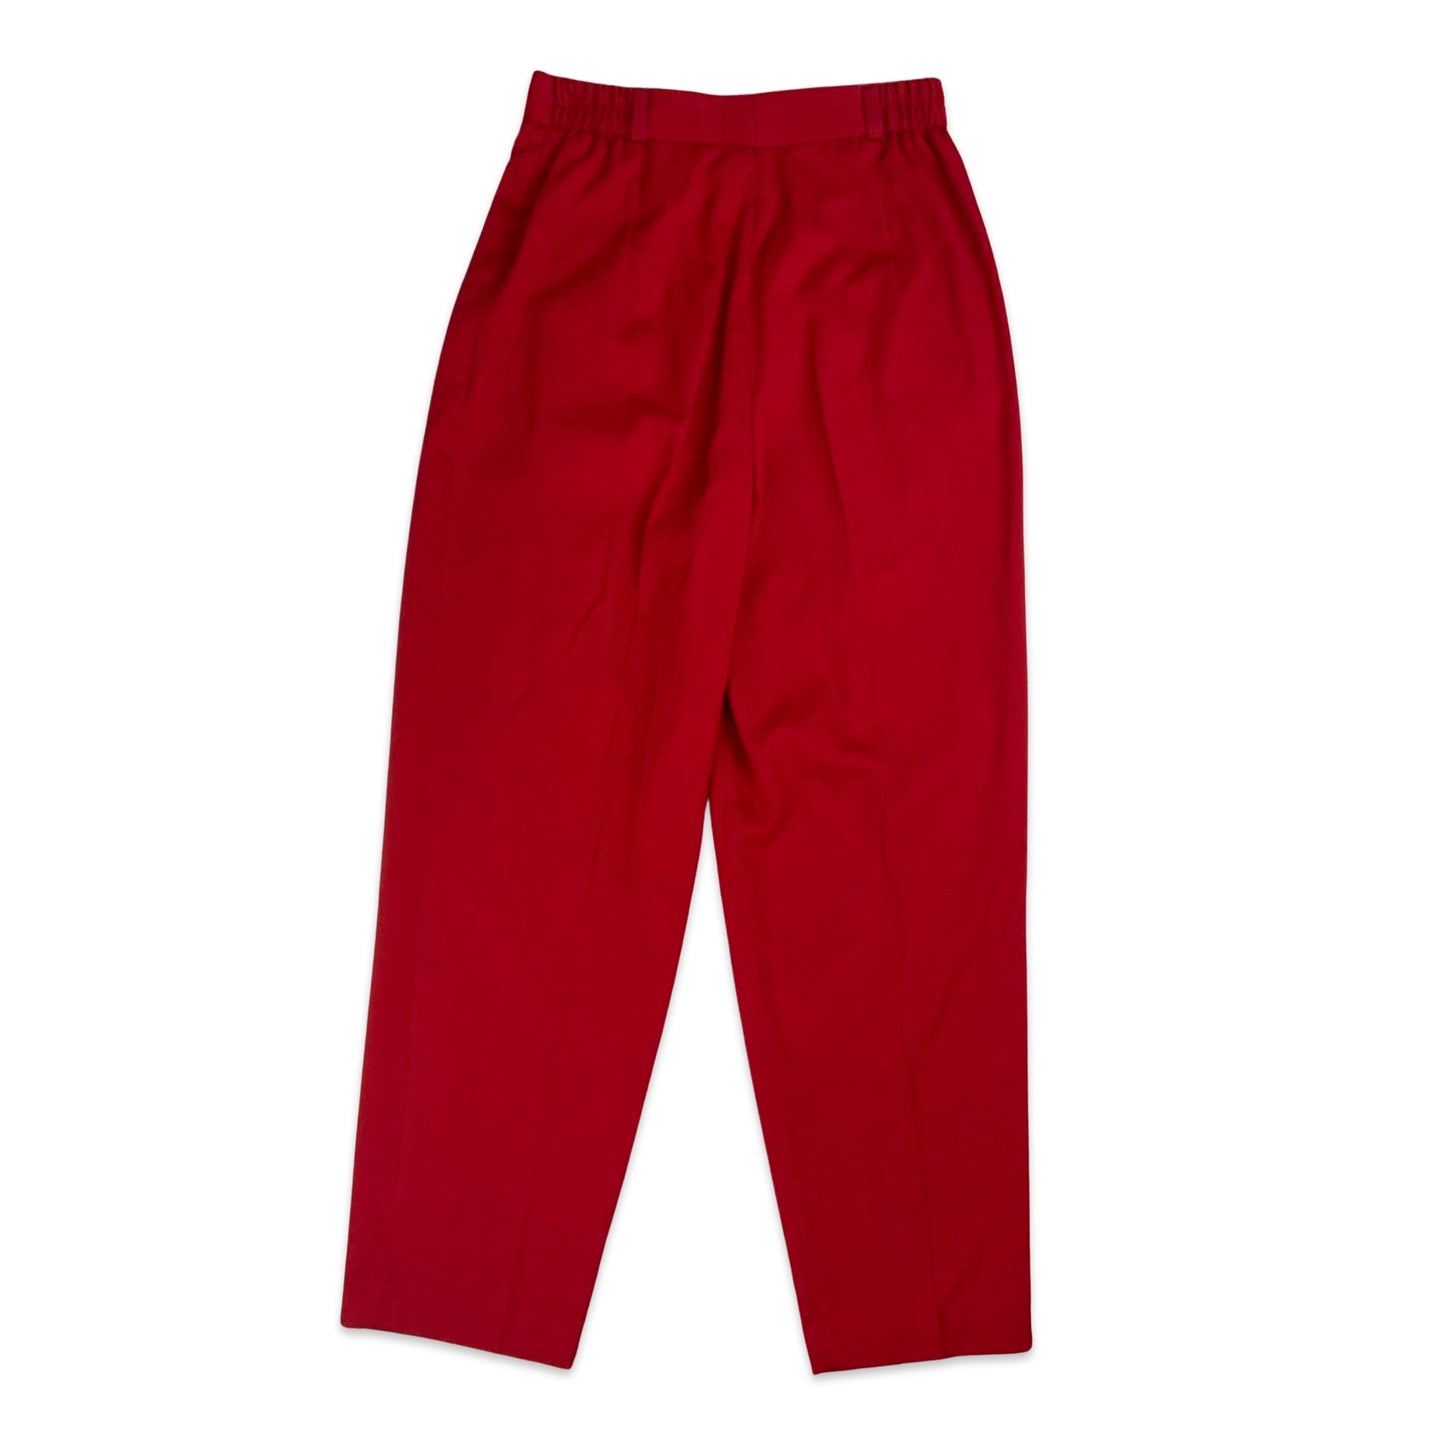 Vintage Red Straight Leg Trousers 6 8